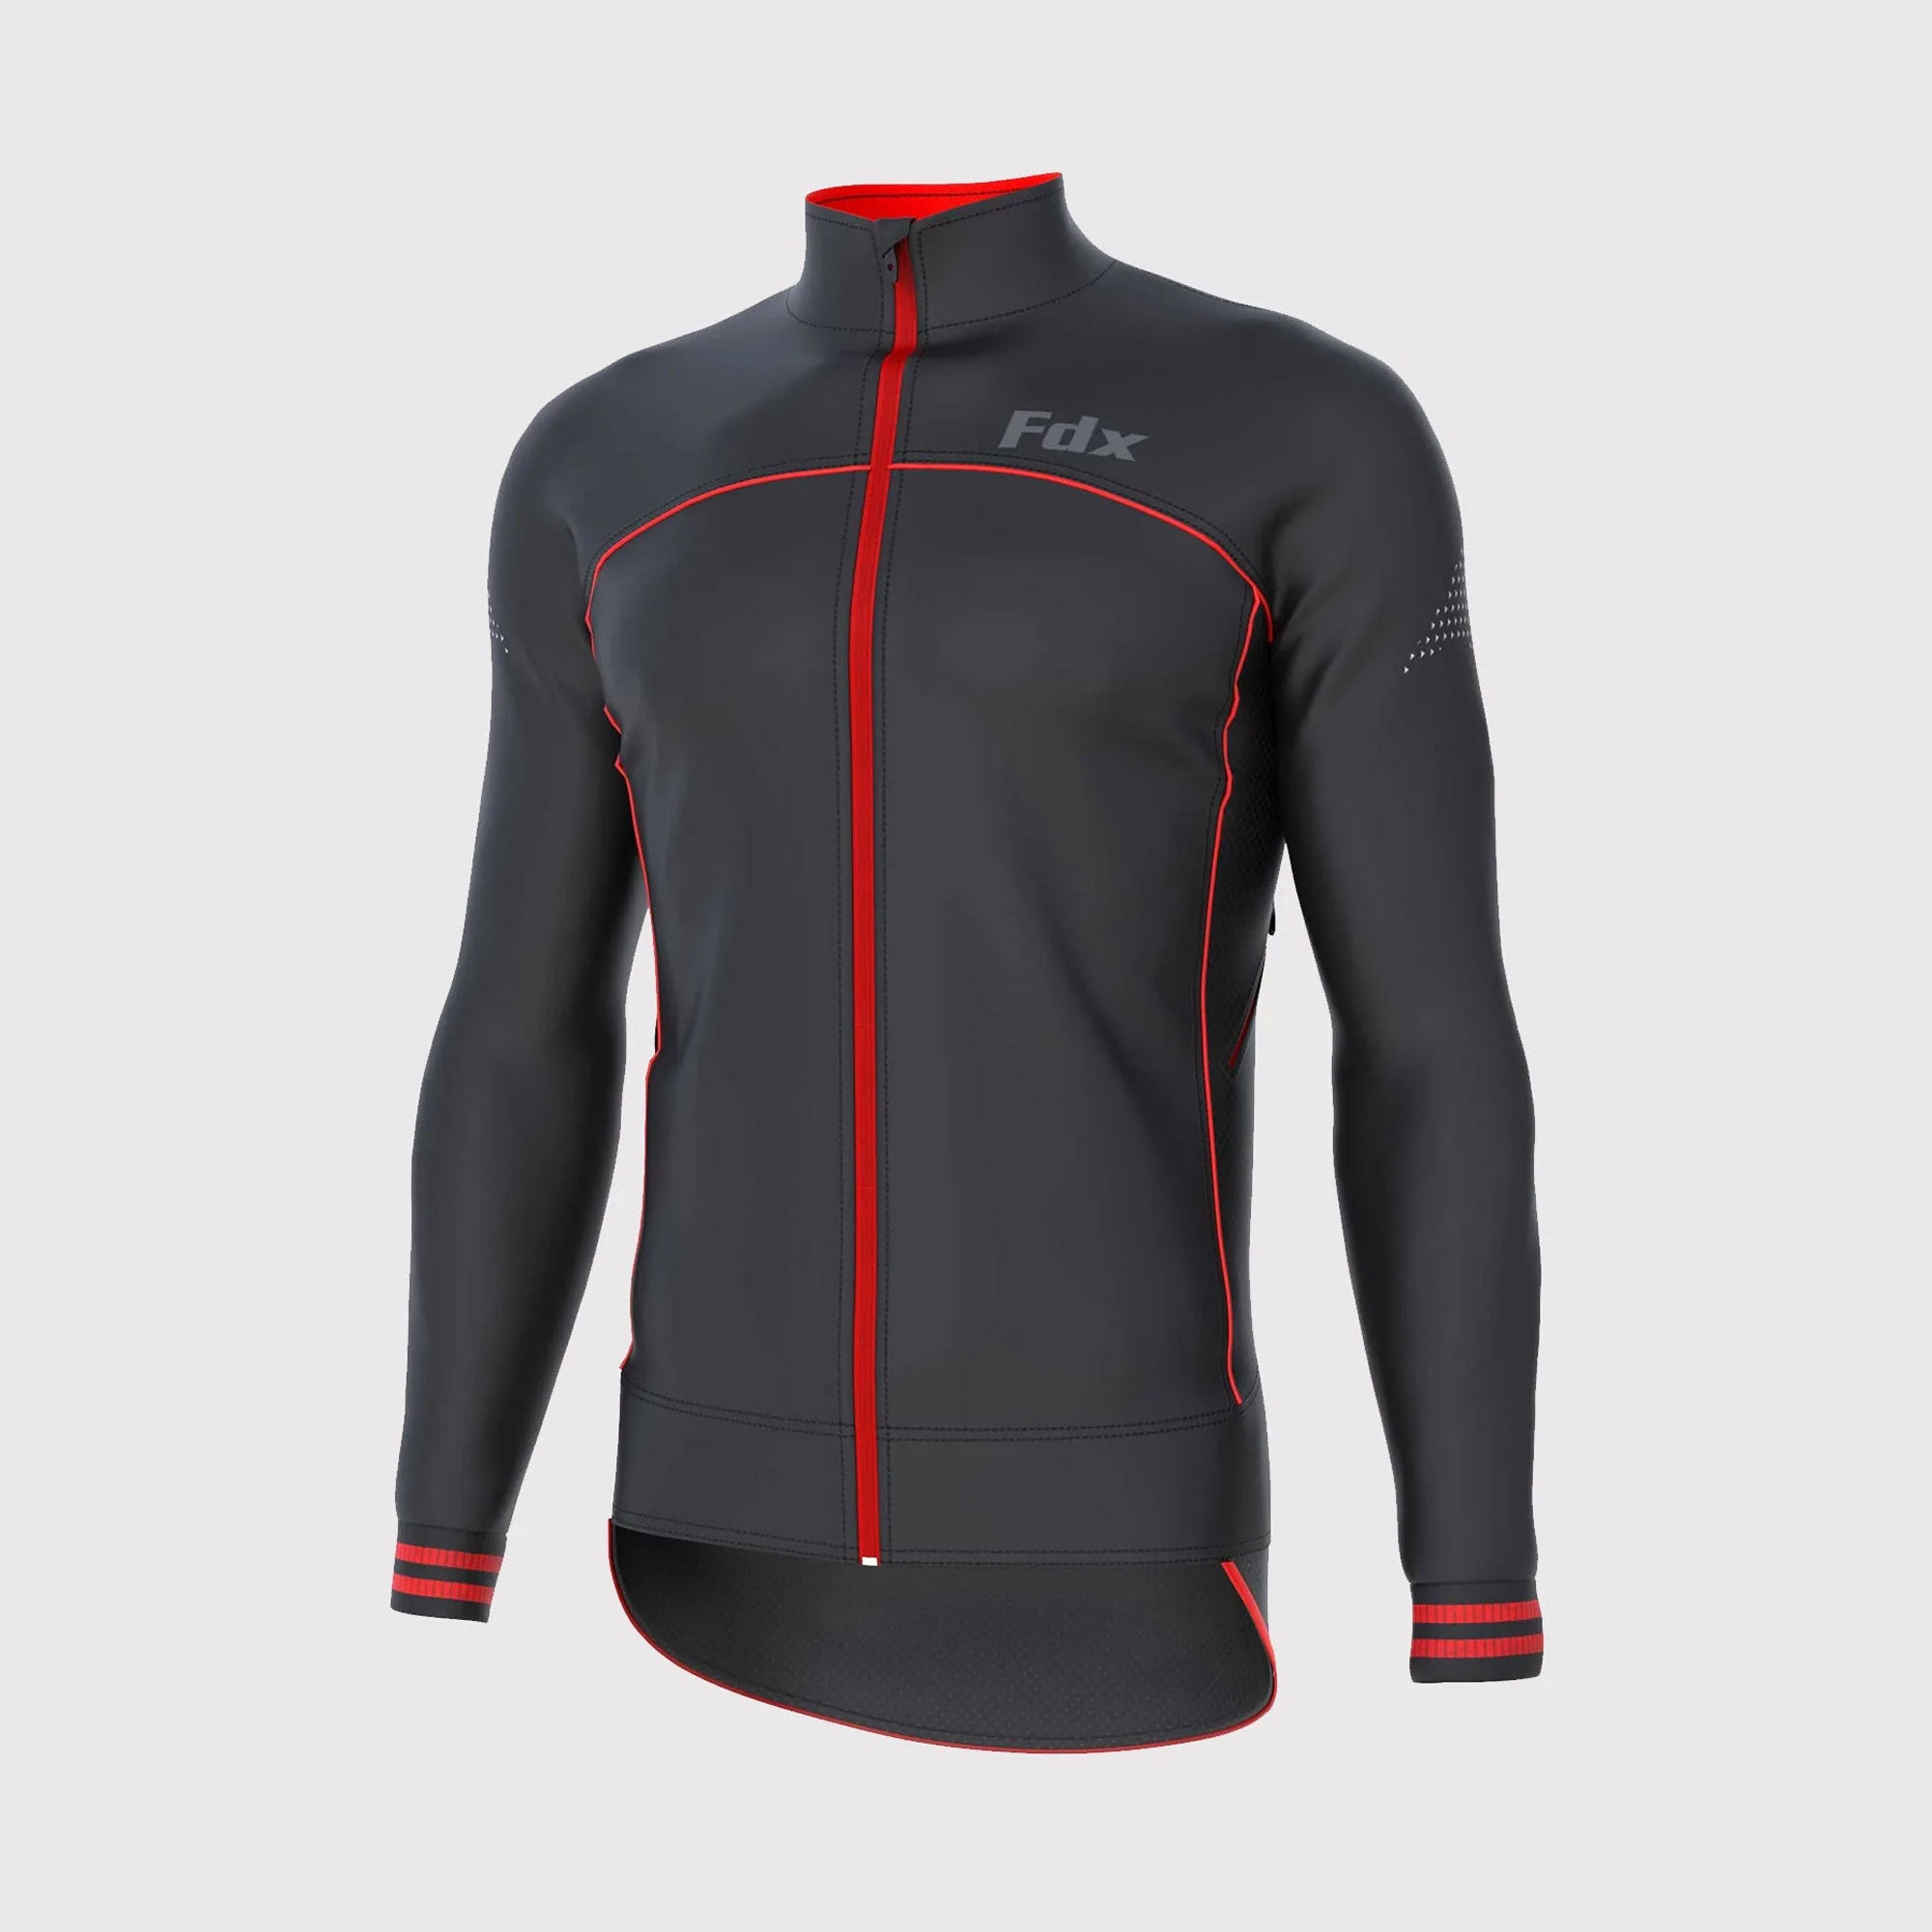 Fdx Mens Black & Red Cycling Jacket for Winter Thermal Casual Softshell Clothing Lightweight, Windproof, Waterproof & Pockets - Apollux